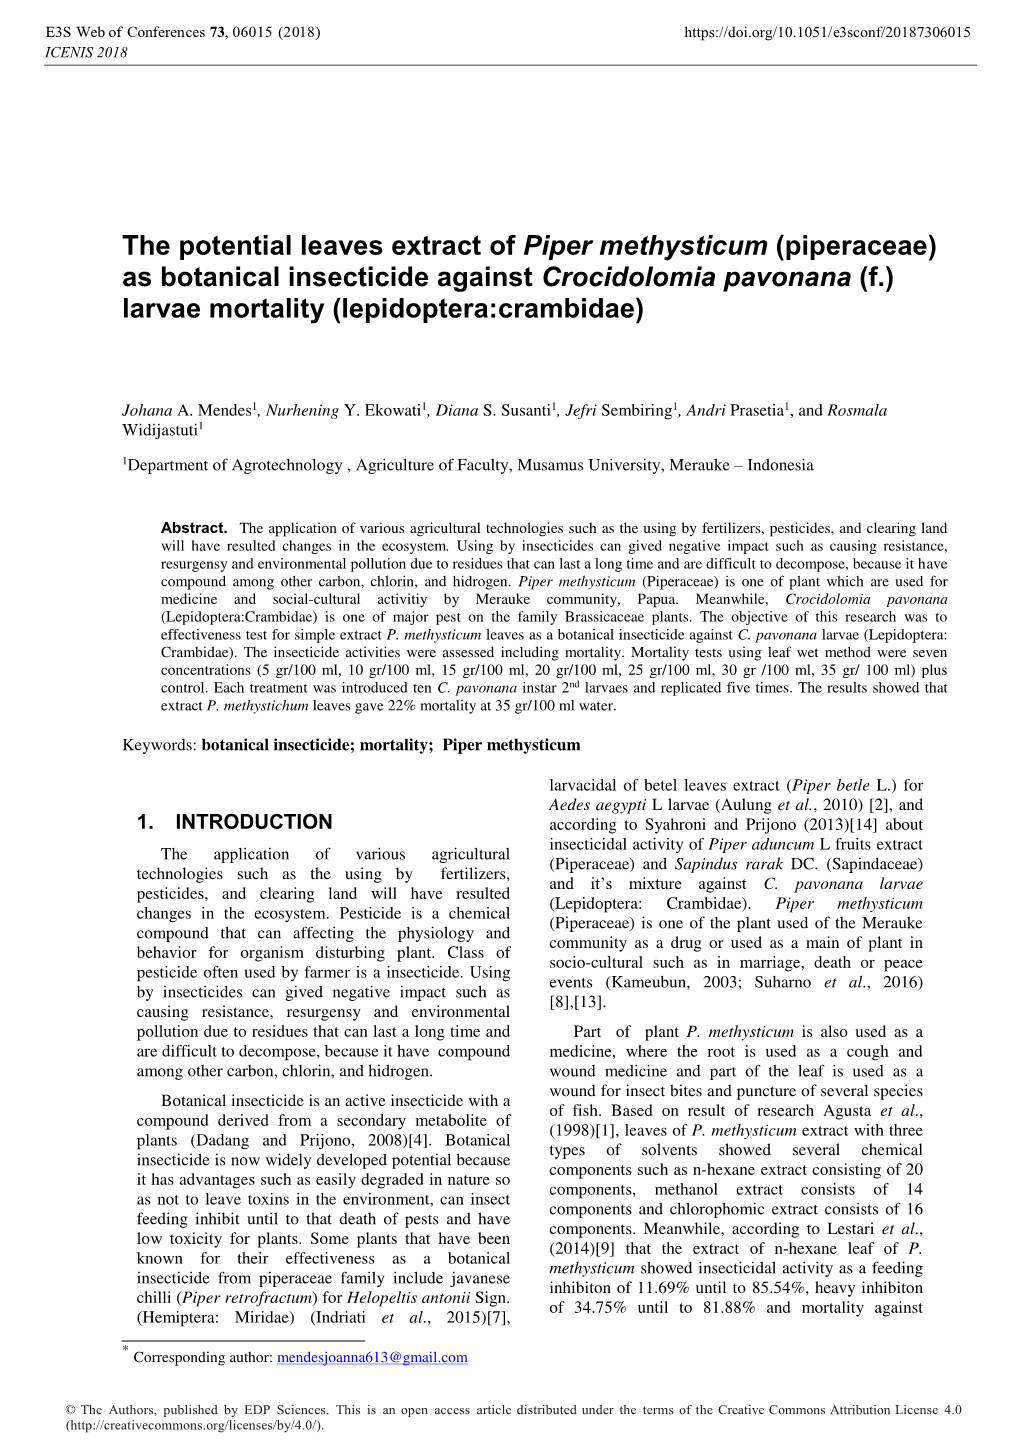 The Potential Leaves Extract of Piper Methysticum (Piperaceae) As Botanical Insecticide Against Crocidolomia Pavonana (F.) Larvae Mortality (Lepidoptera:Crambidae)